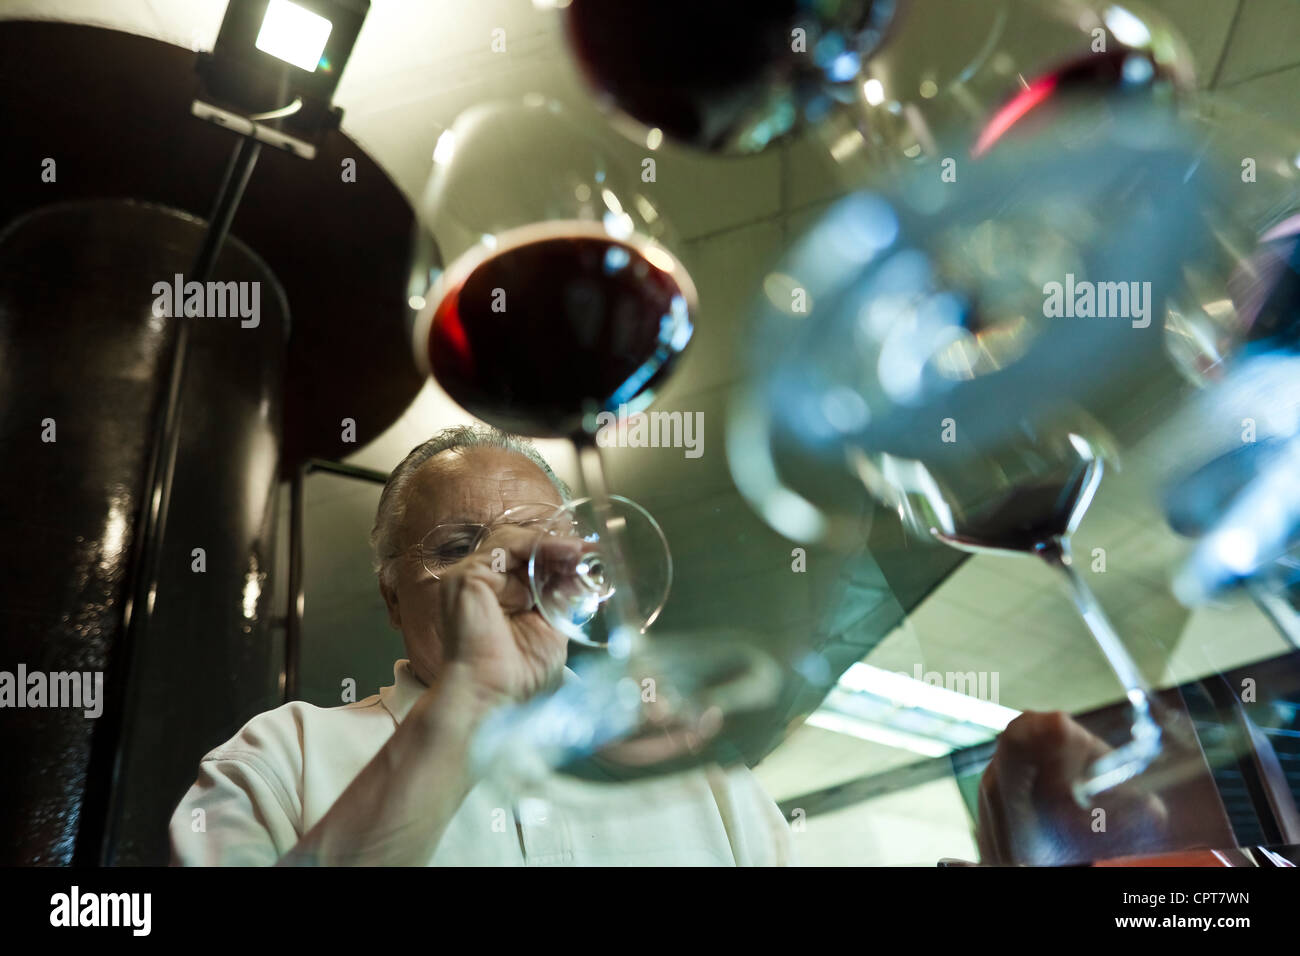 Angelo GAJA, a famous Italian wine-grower., The wine master smelling one of his productions. Stock Photo